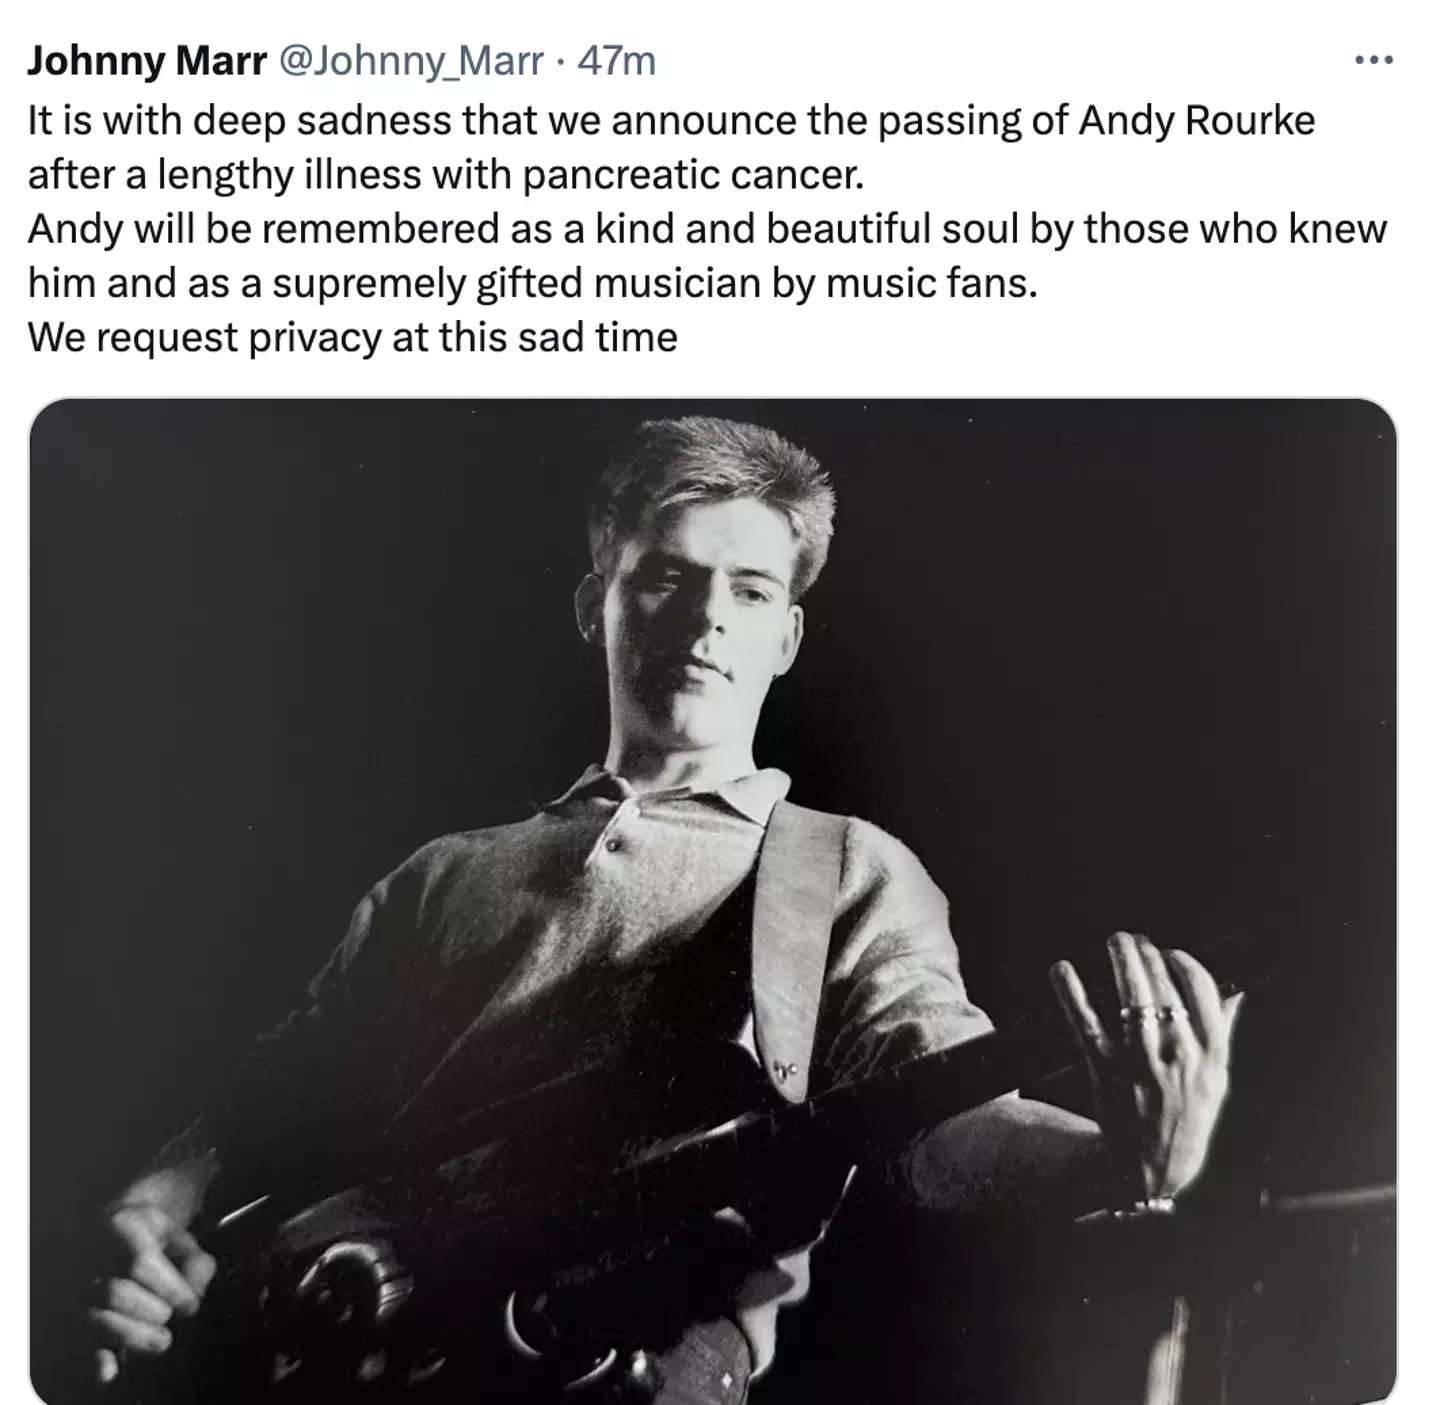 Andy Rourke's death was announced on Twitter.